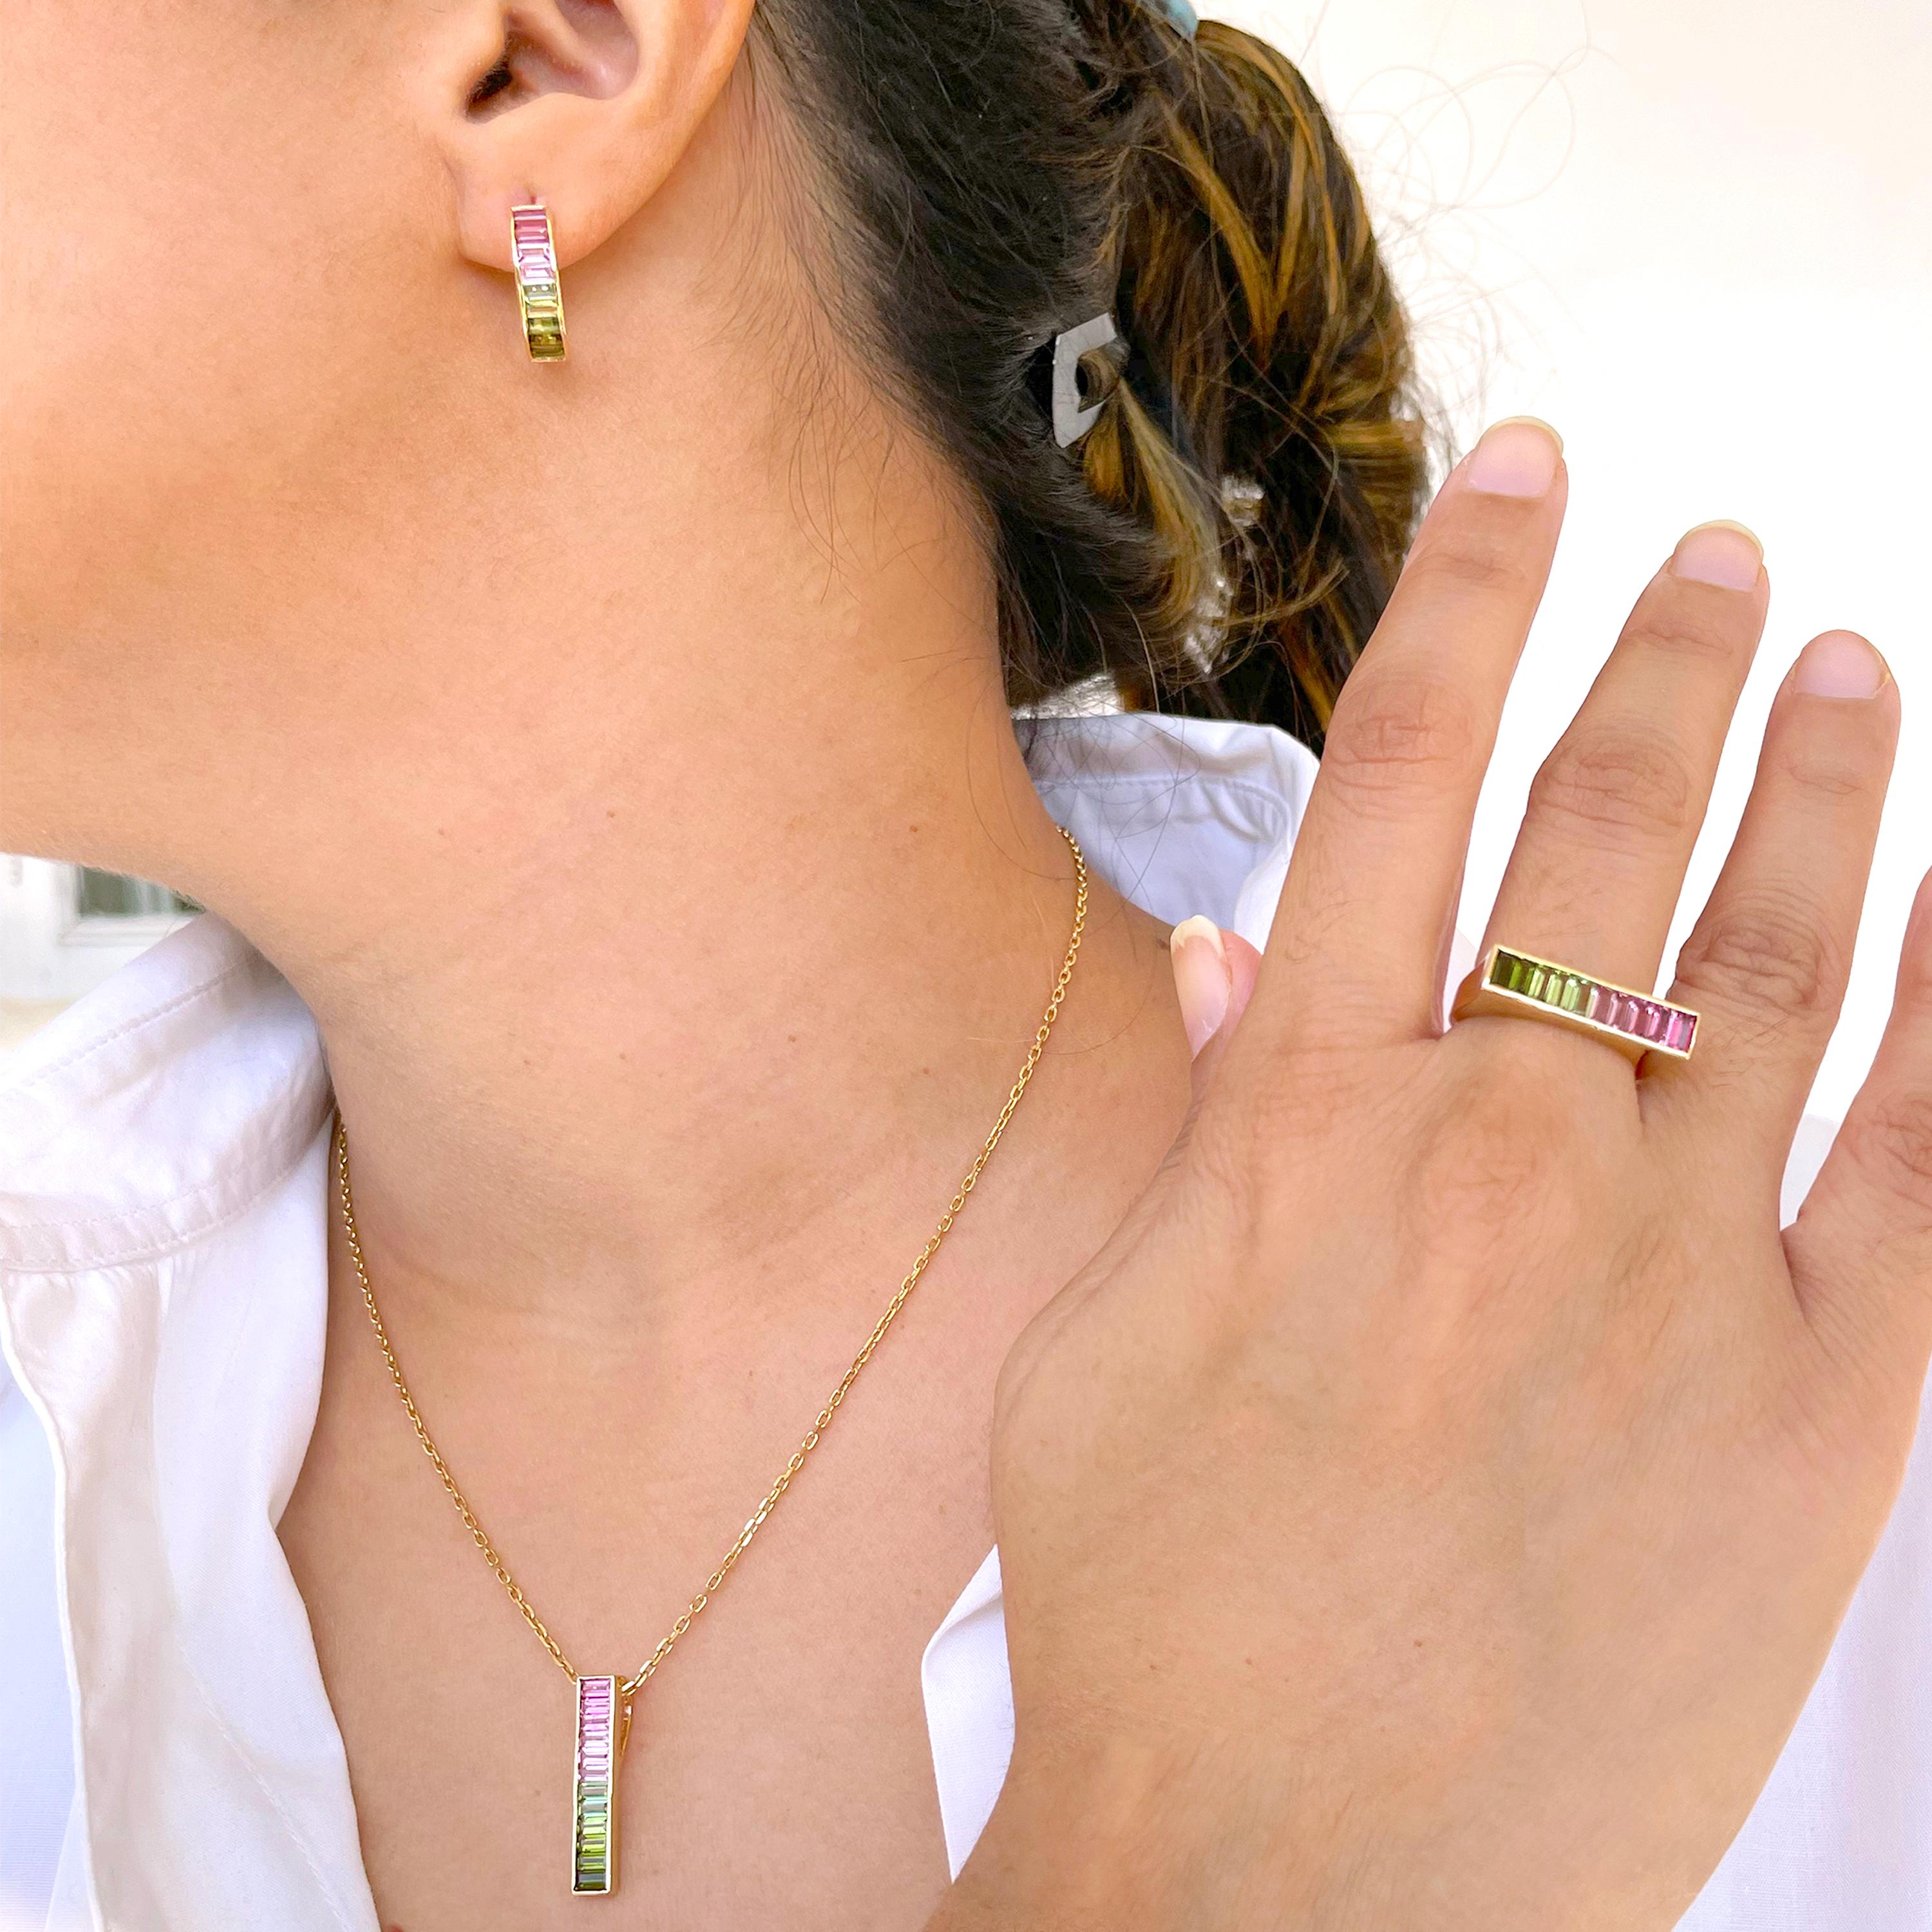 18 karat yellow gold green pink bi-tourmaline bar pendant necklace earrings ring set.

Add something special to your jewellery box with bi-color tourmaline Pendant Earrings Ring Set.  Set in 18 karat gold, this classic linear design features channel